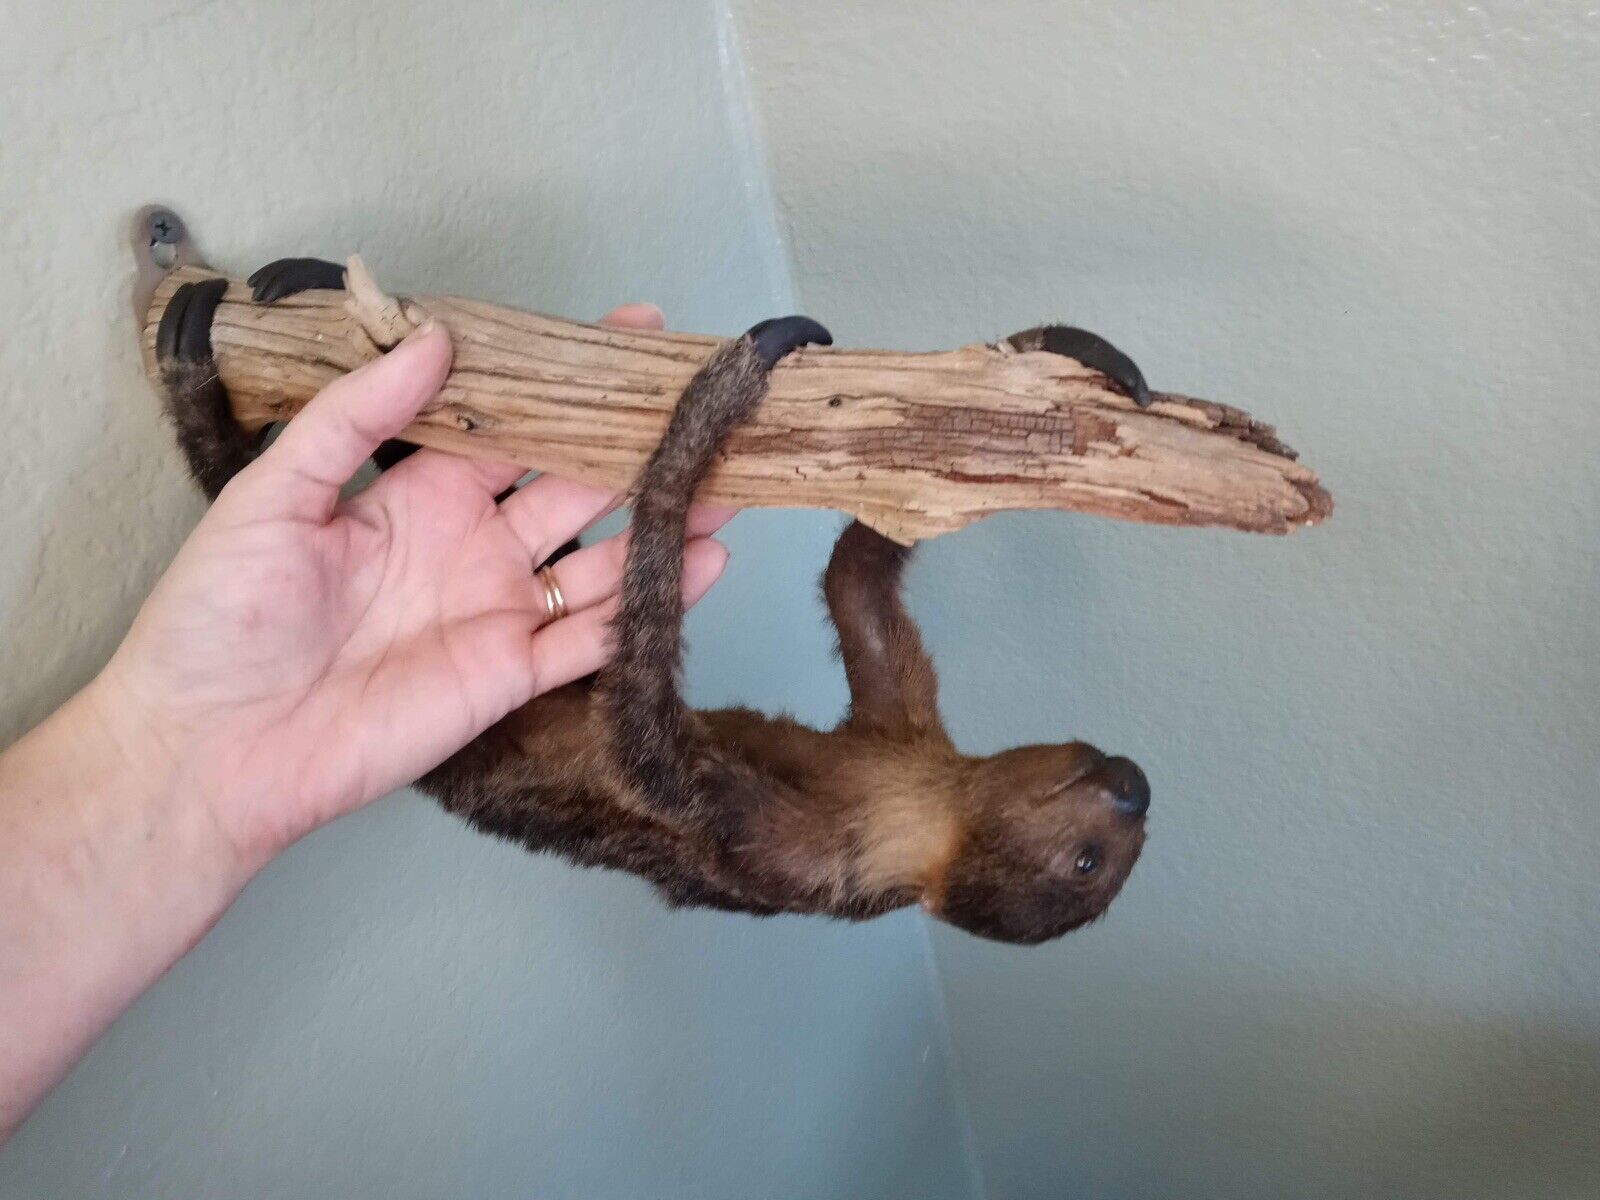 Baby Sloth Taxidermy Table Mount Full Body